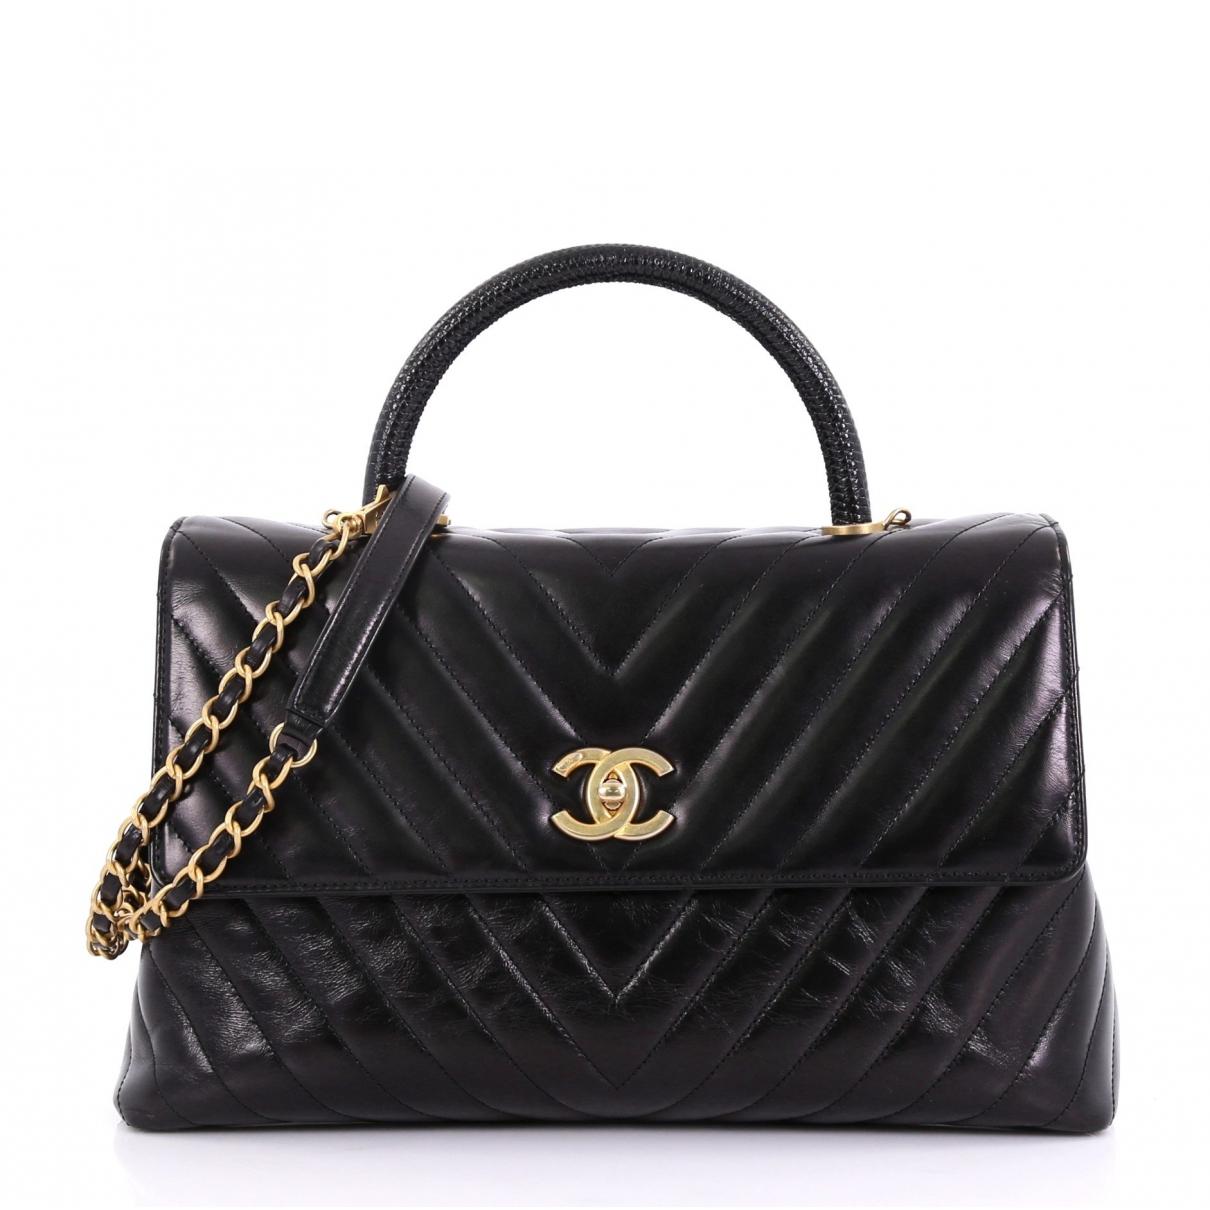 Lyst - Chanel Pre-owned Coco Handle Black Leather Handbags in Black